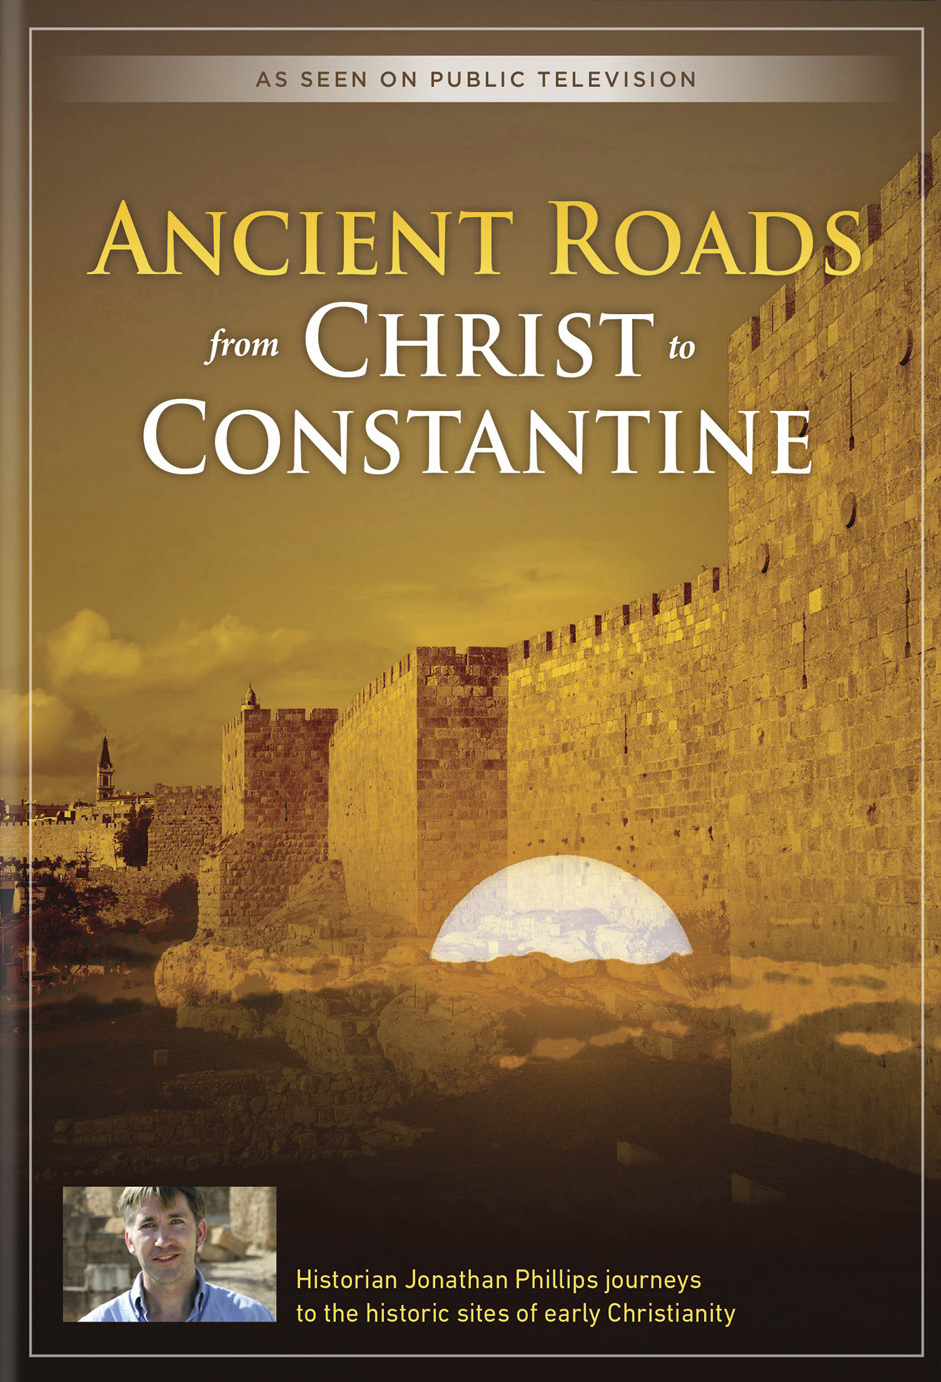 Ancient Roads from Christ to Constantine [2 Discs] [DVD]